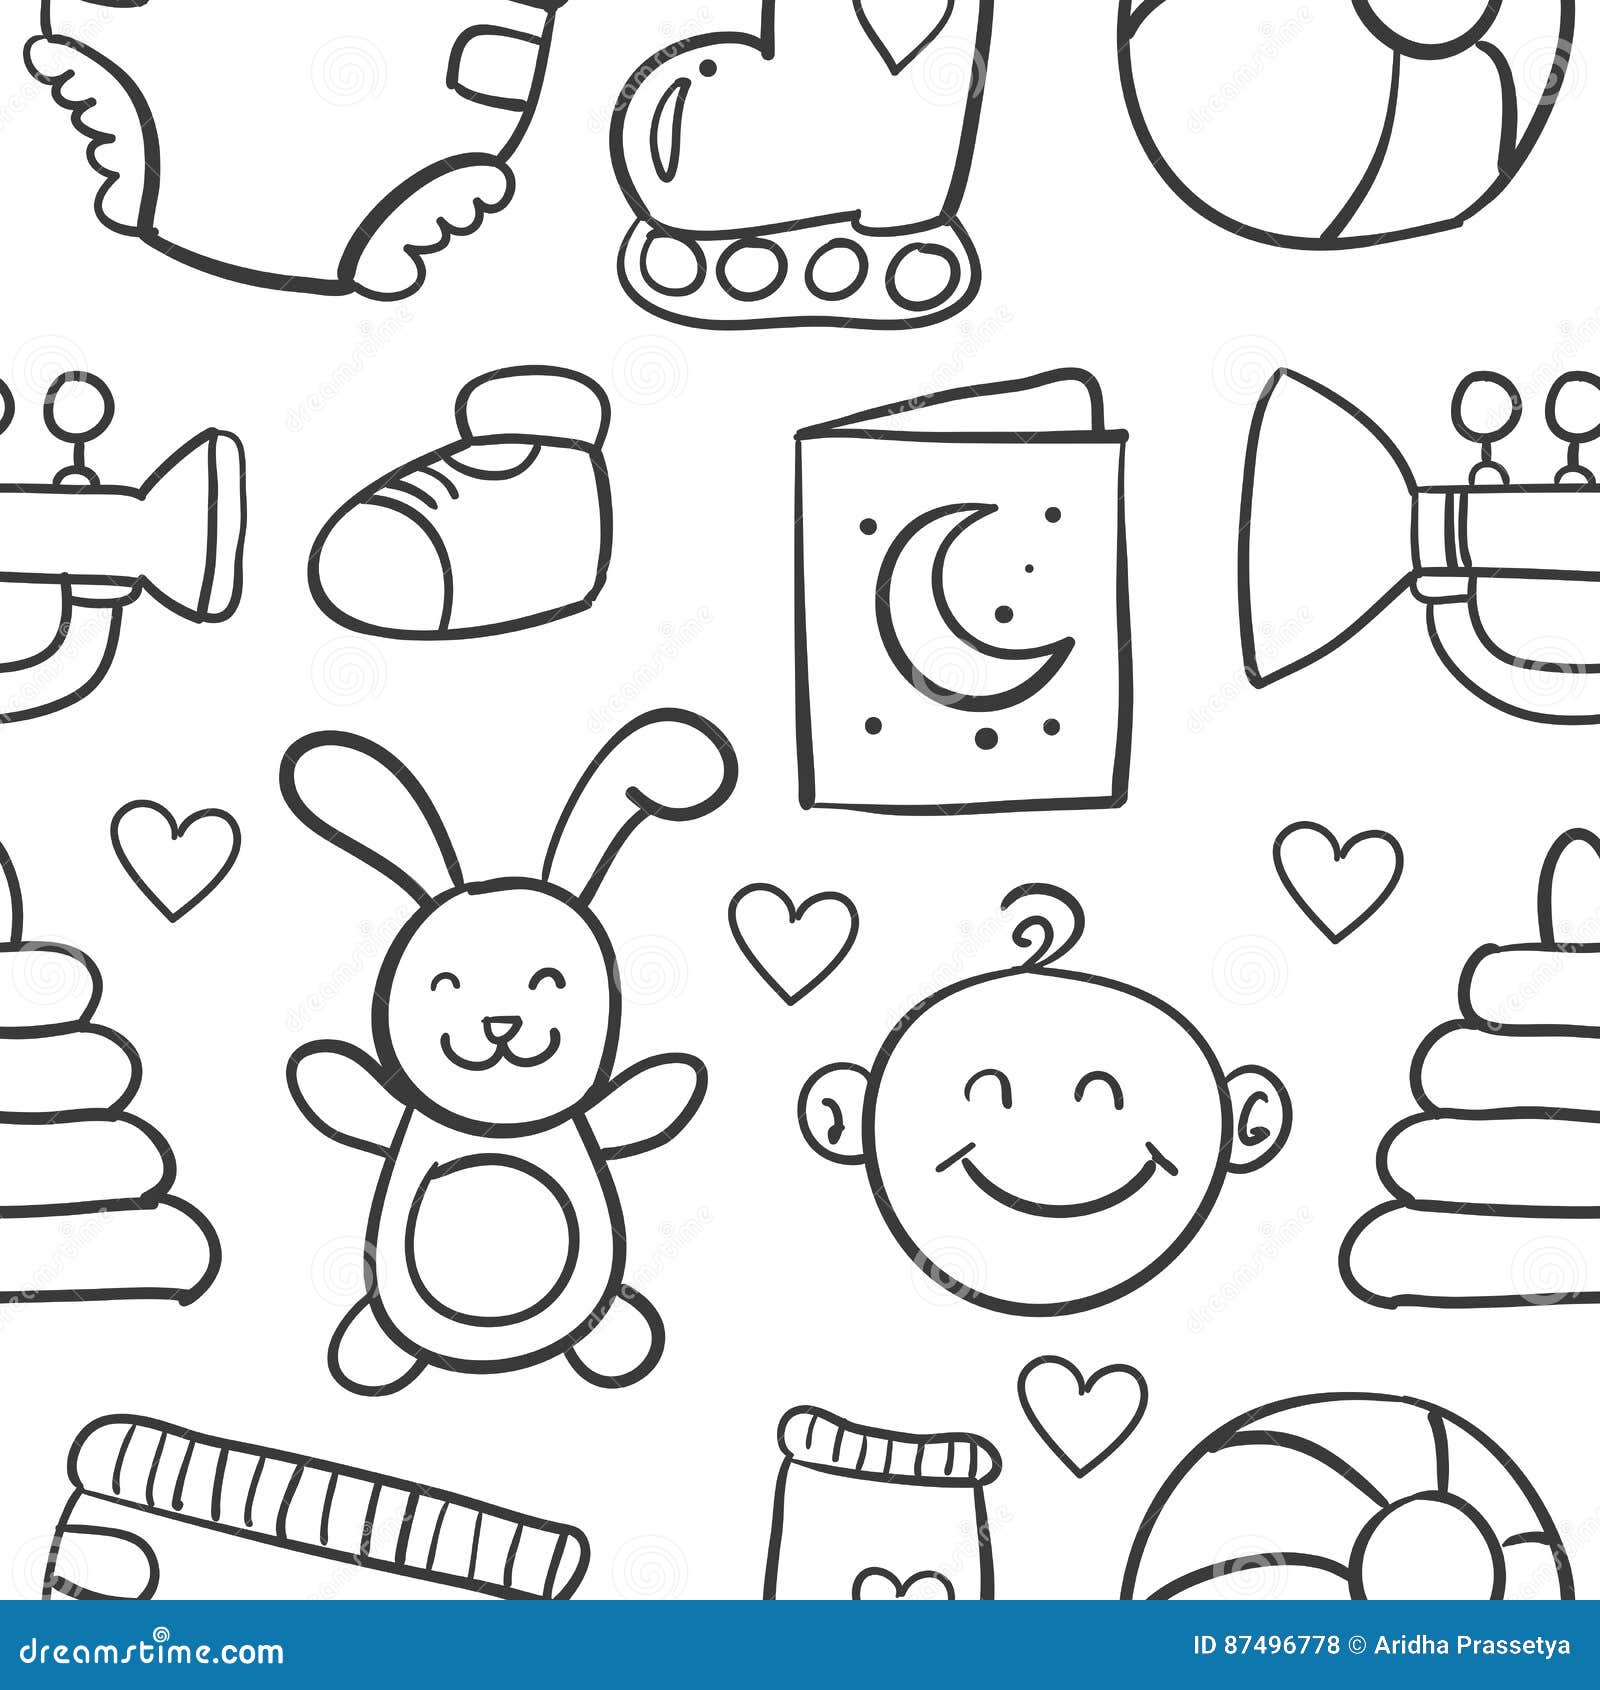 Collection Stock of Baby Element Doodles Stock Vector - Illustration of ...